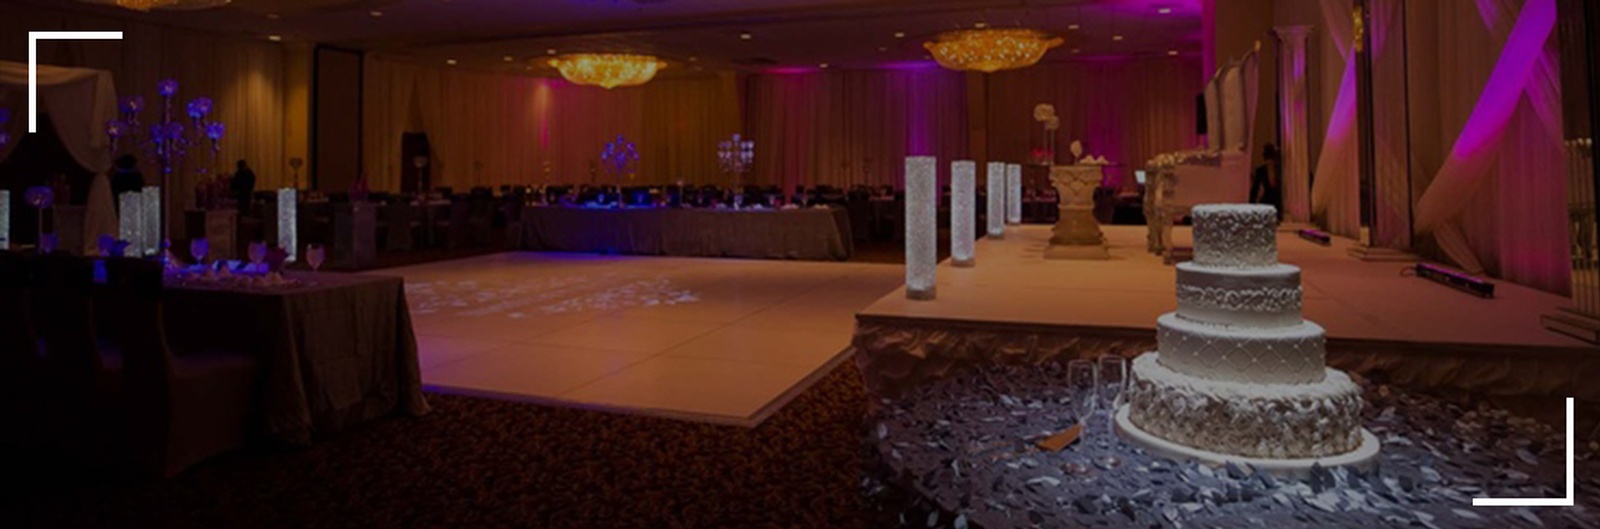 Professional Wedding Planning Services in Houston, Texas